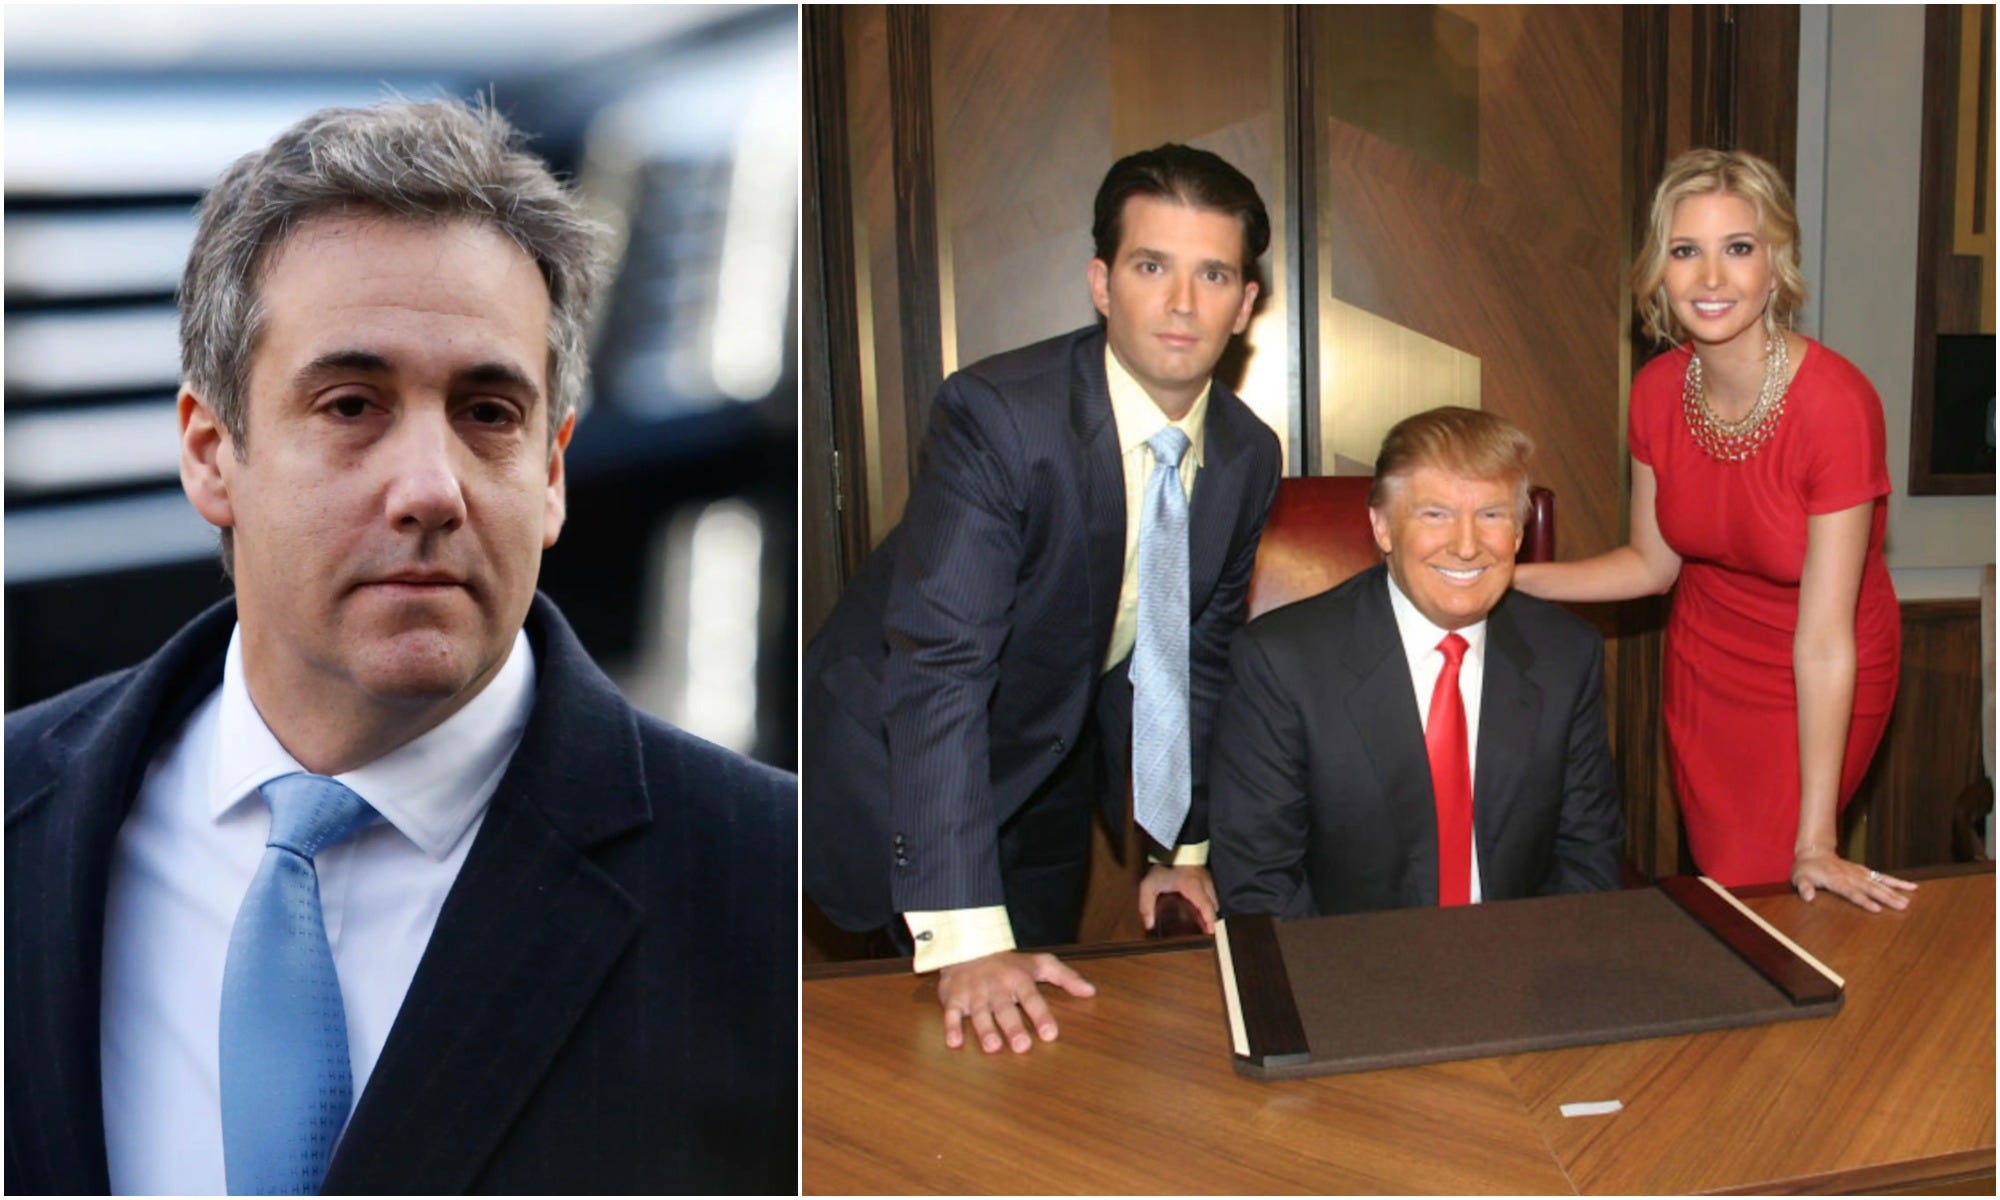 Michael Cohen (L), Donald Trump with his children Don Jr. and Ivanka (R).